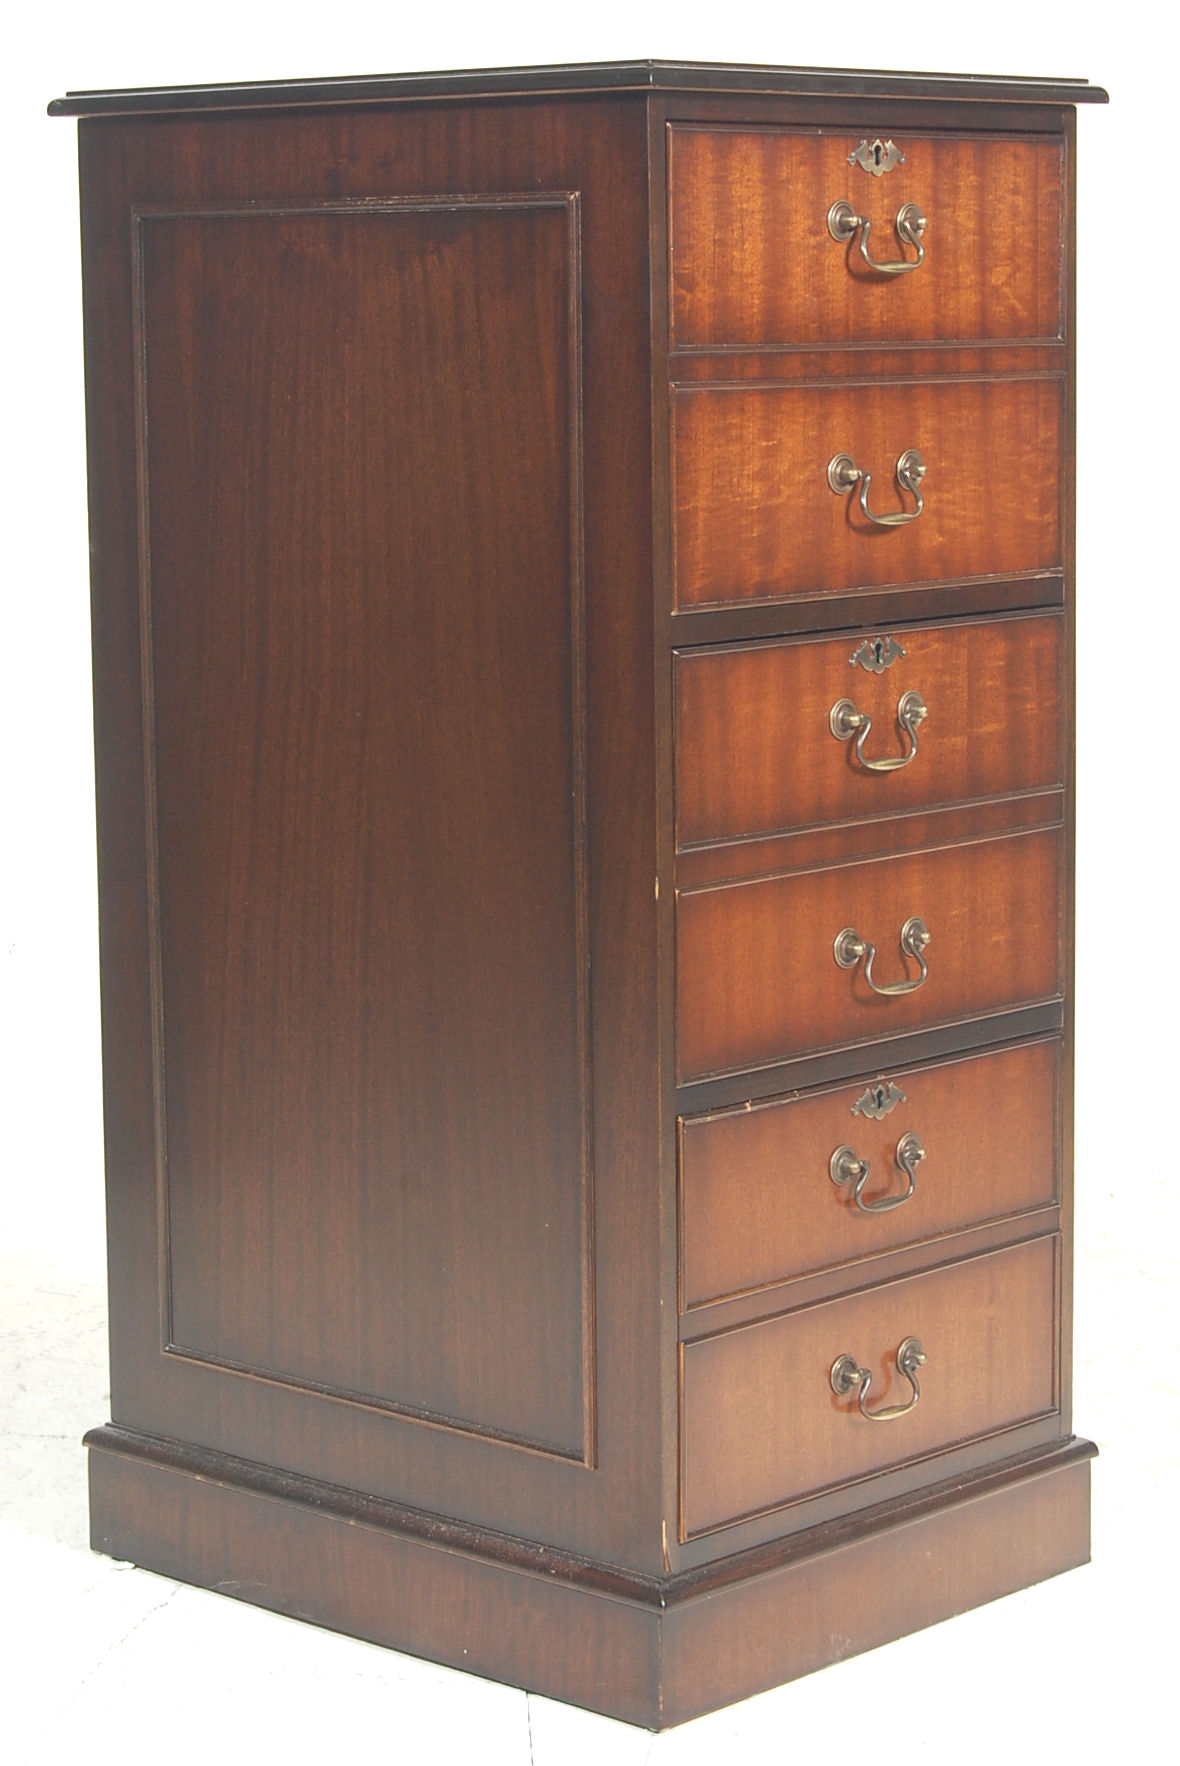 ANTIQUE STYLE MAHOGANY OFFICE FILING CABINET